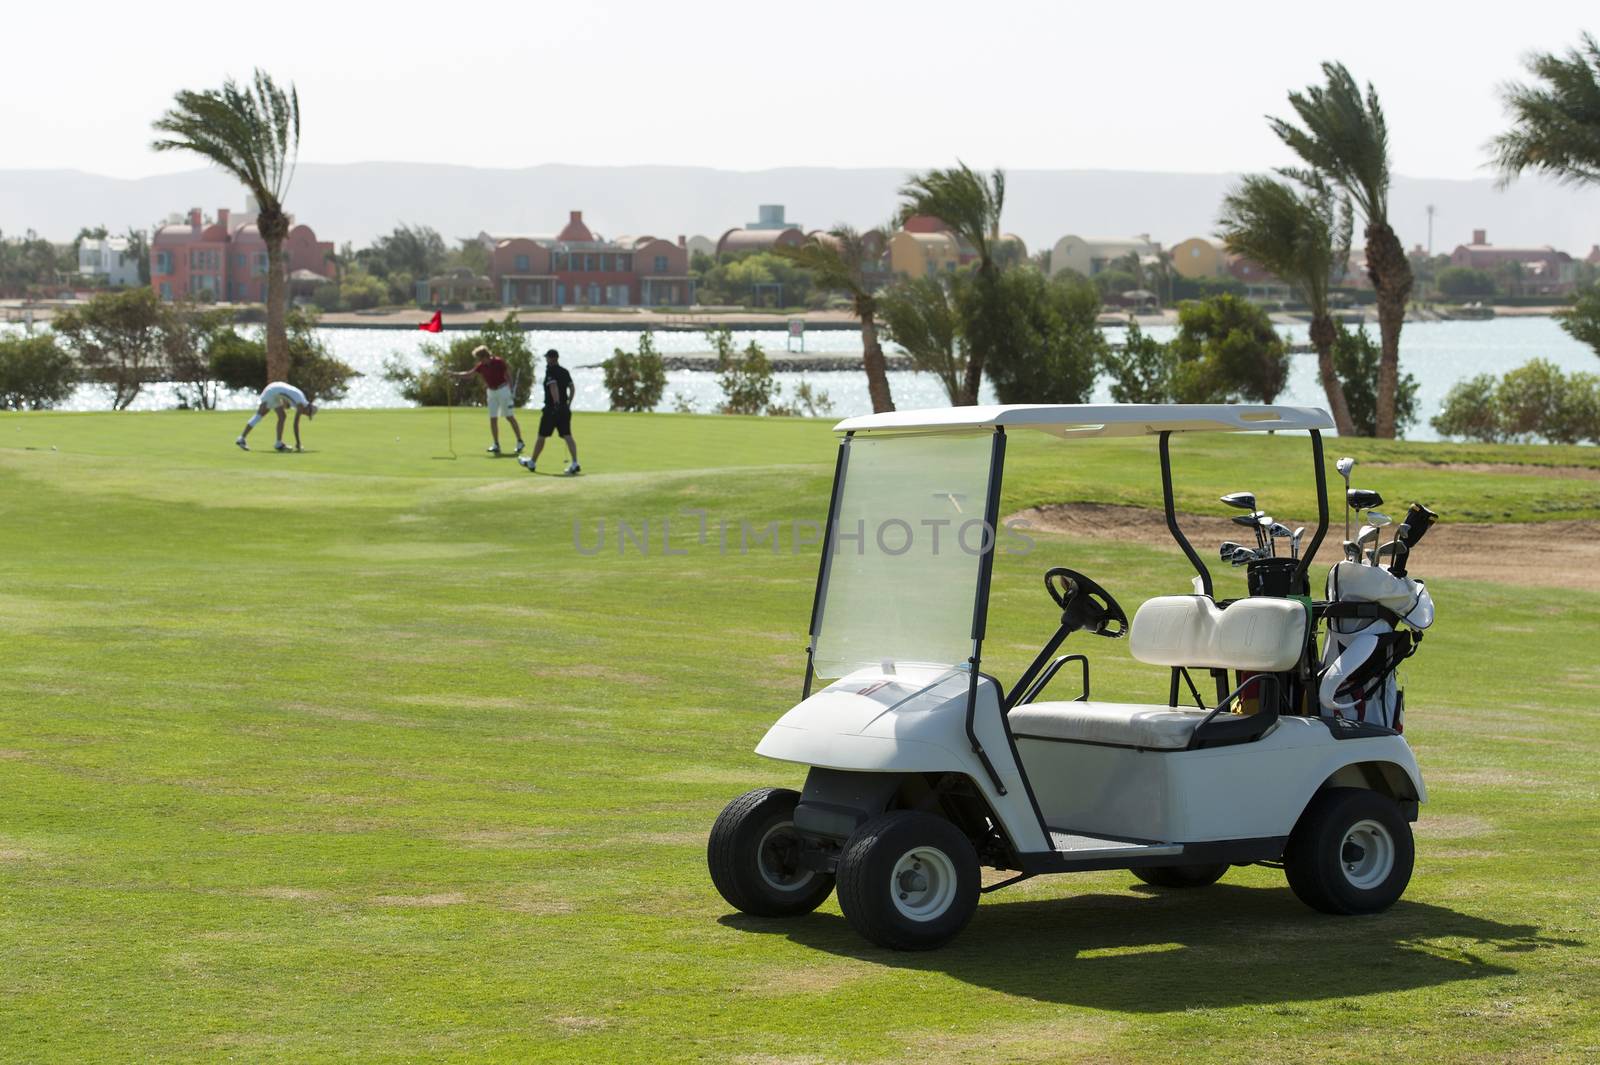 Electric golf buggy on the fairway with golfers on green in the distance